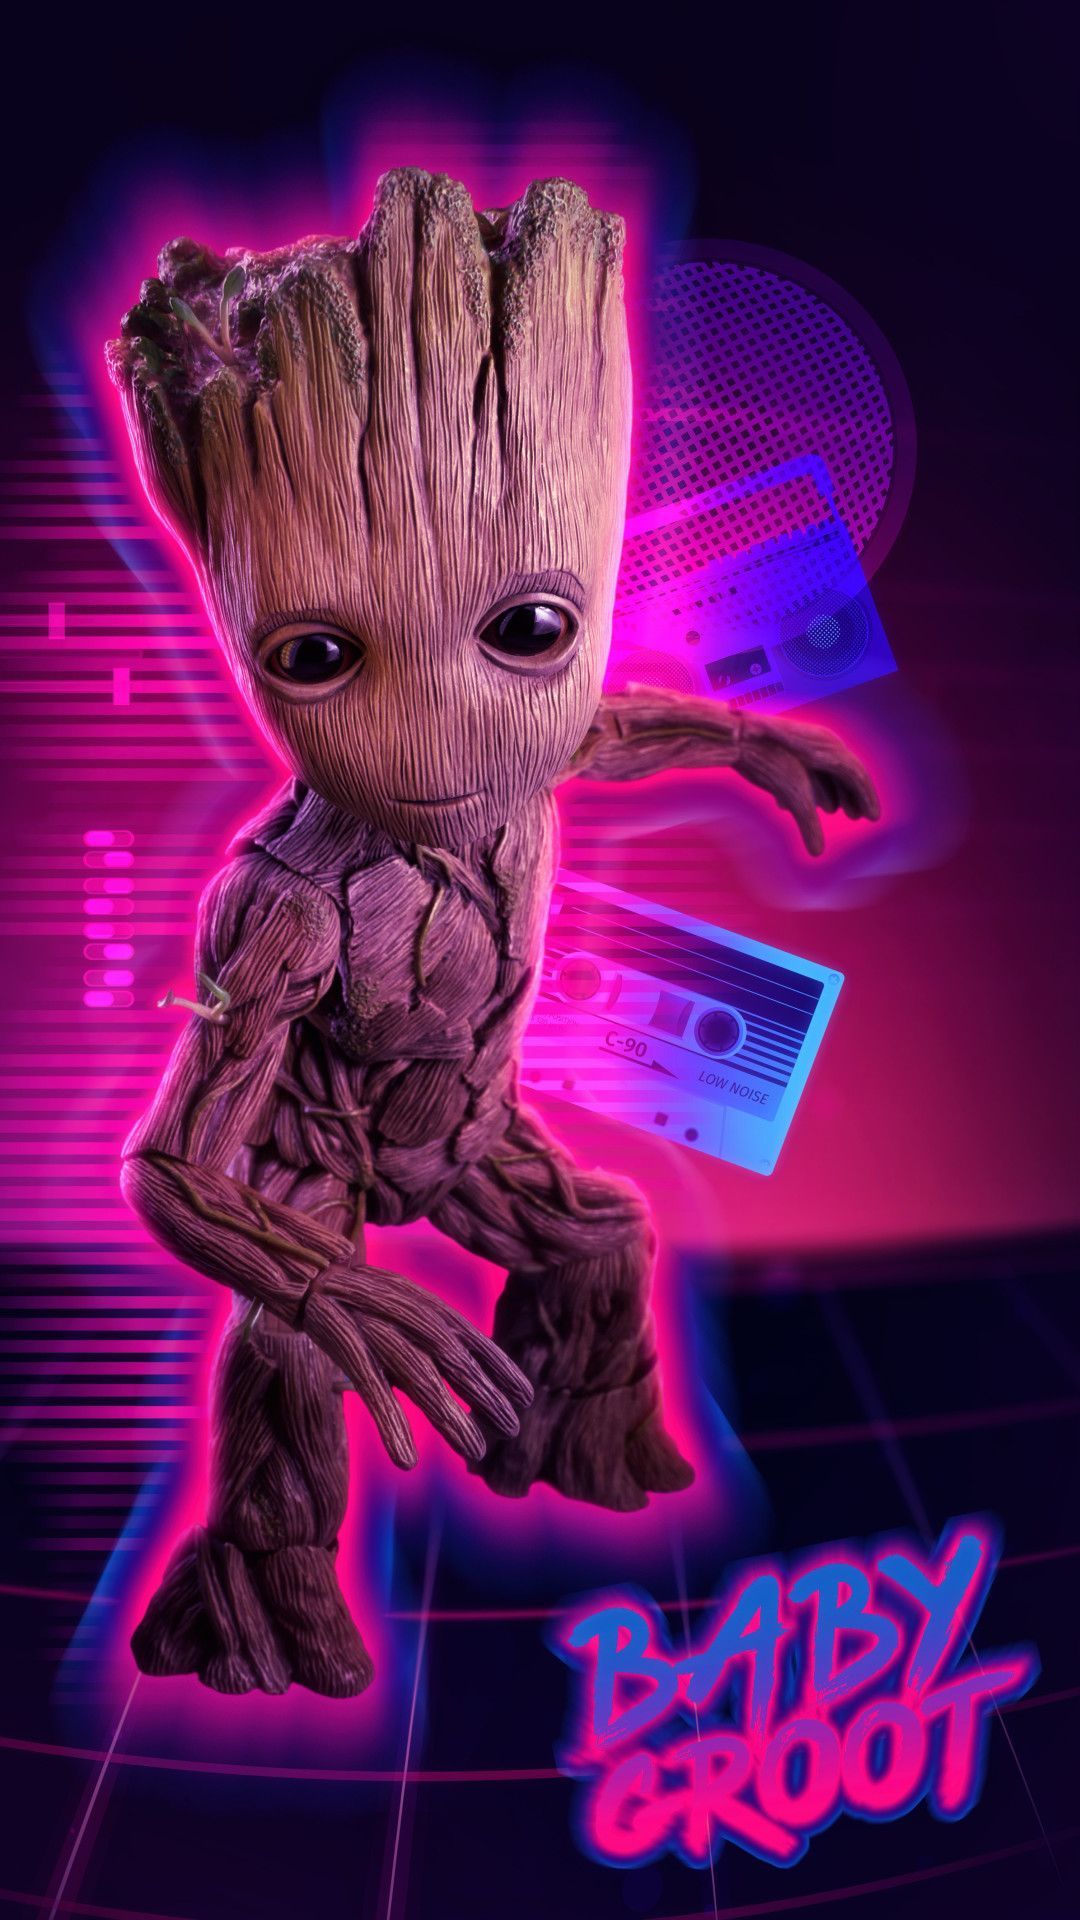 4k Baby Groot Mobile Wallpaper (iPhone, Android, Samsung, Pixel, Xiaomi). Groot marvel, Baby groot, Marvel wallpaper